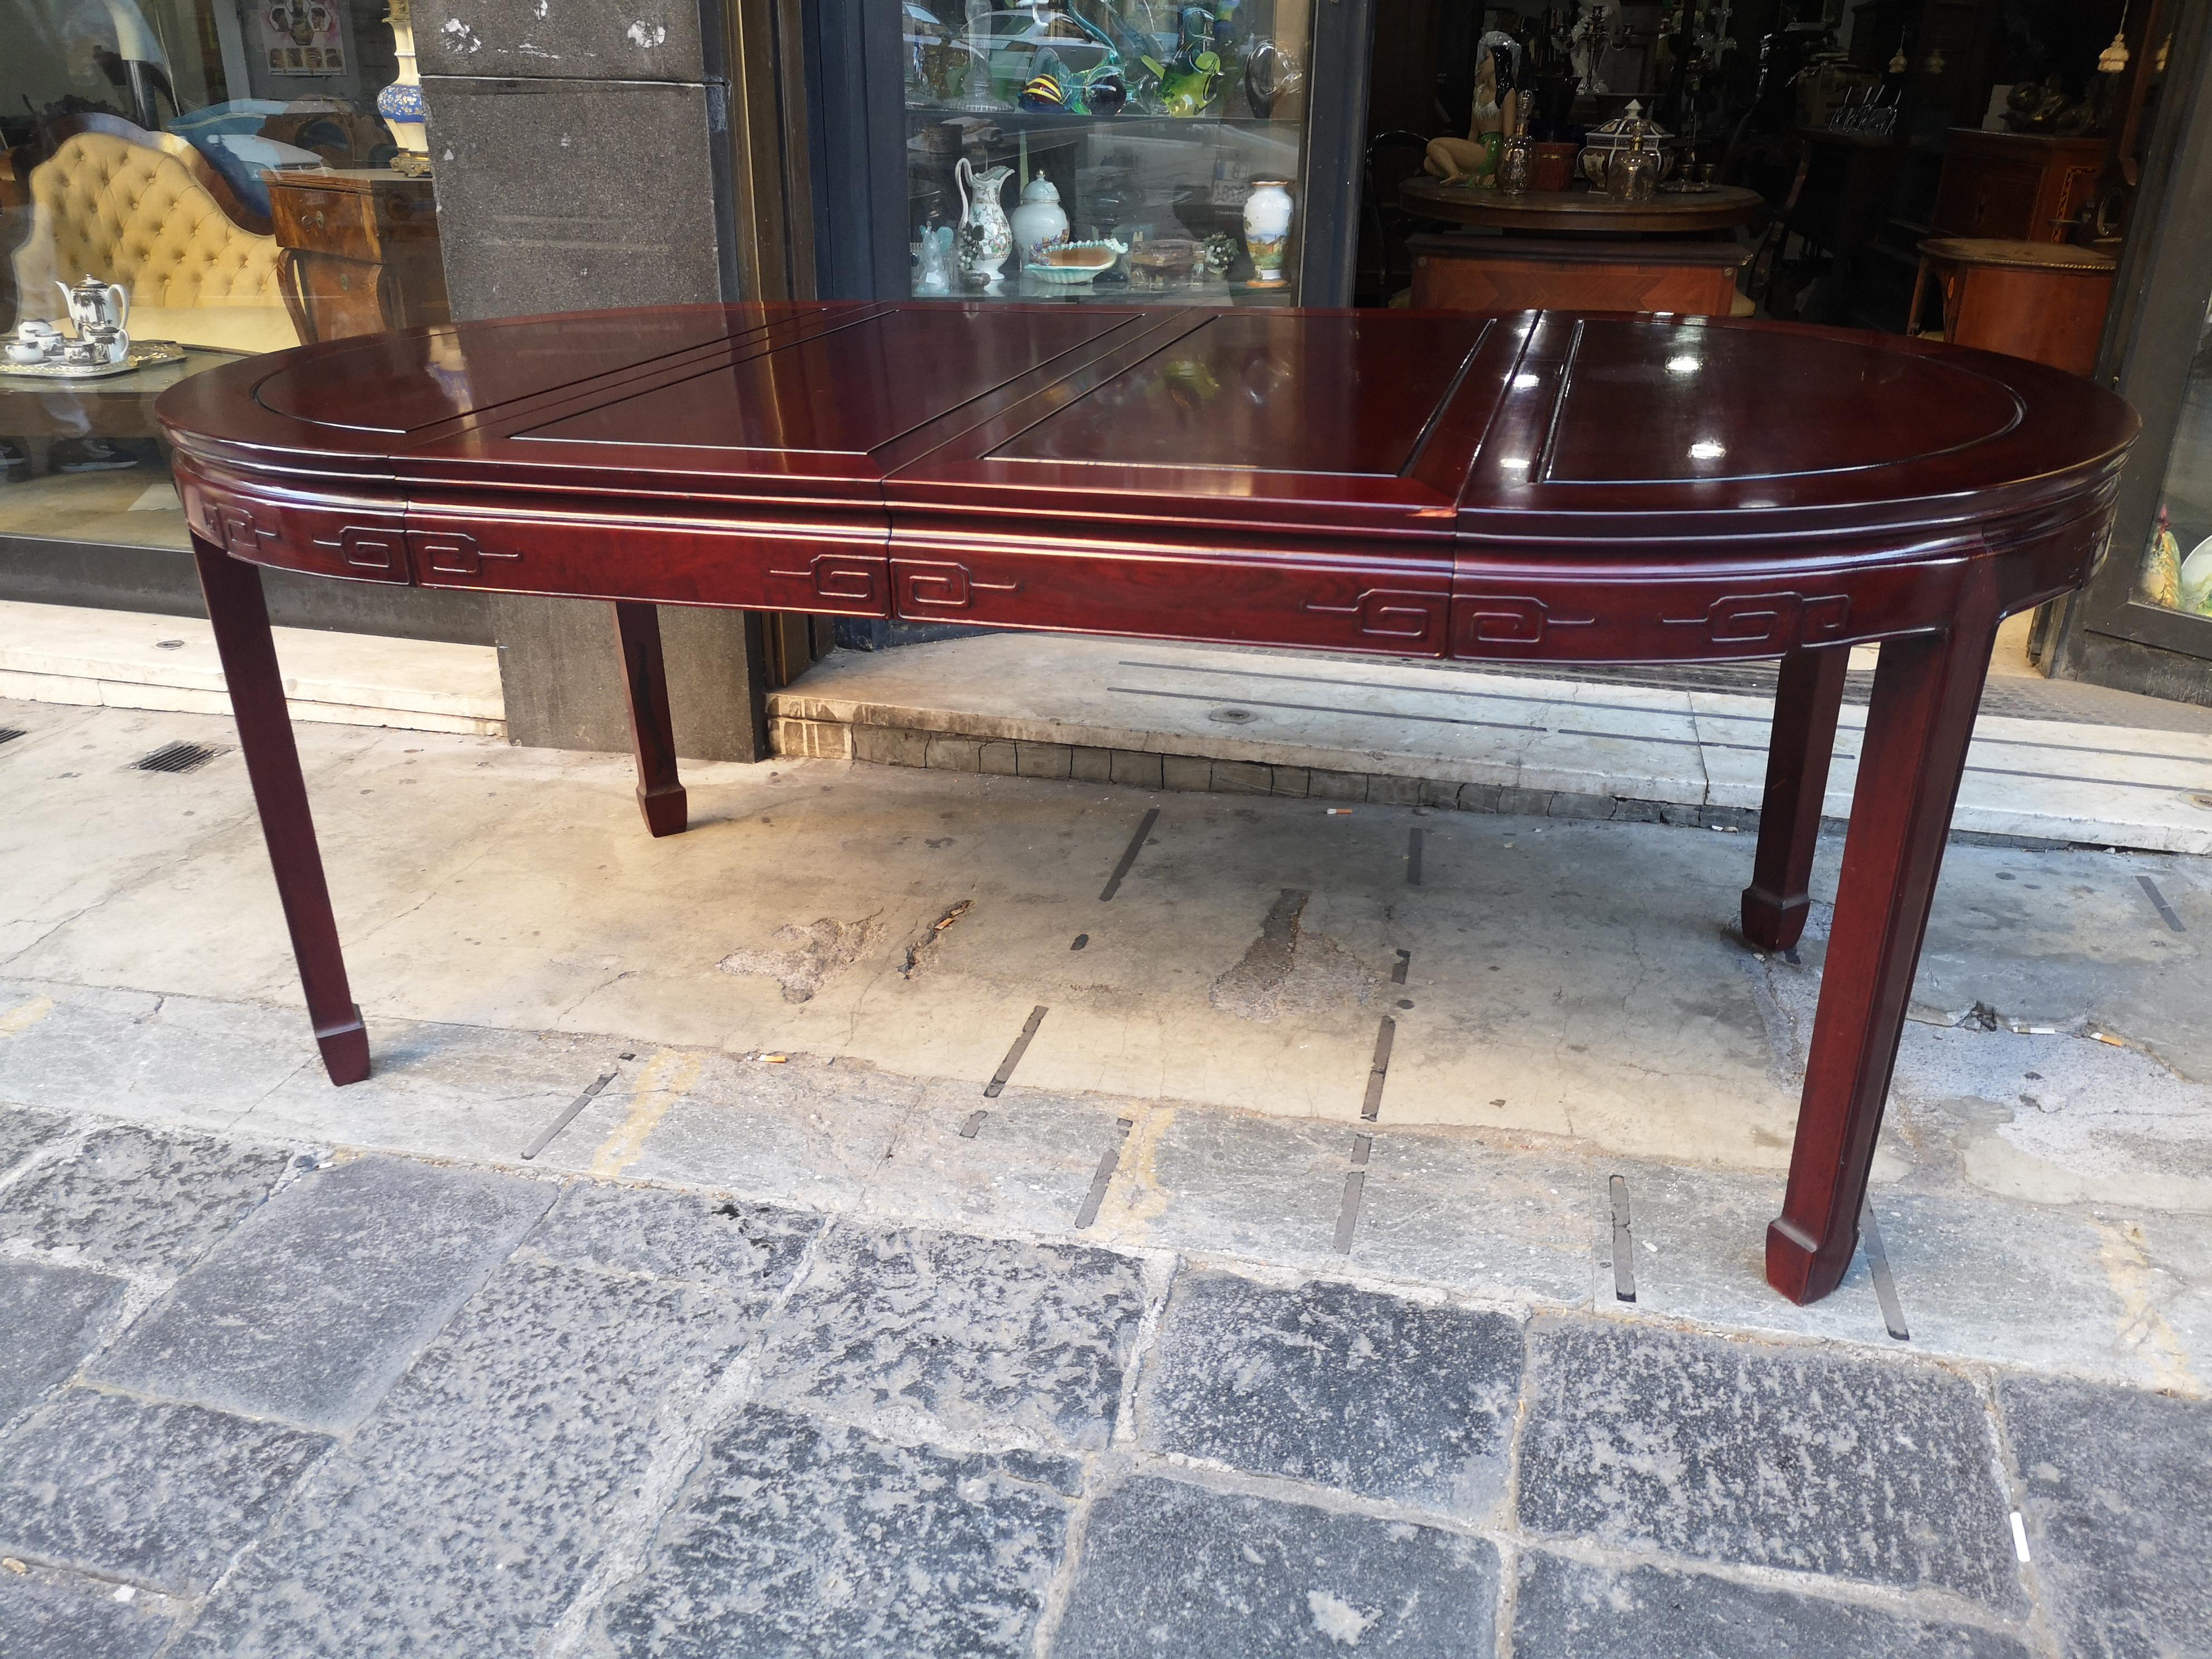 Chinese solid mahogany wood round dining table in excellent condition from the 1970s
The table has a closed size of 112 x 112 cm with 4 faceted legs.
In height it measures 79 cm
with two extensions, also made of mahogany, each 46 cm, and then open